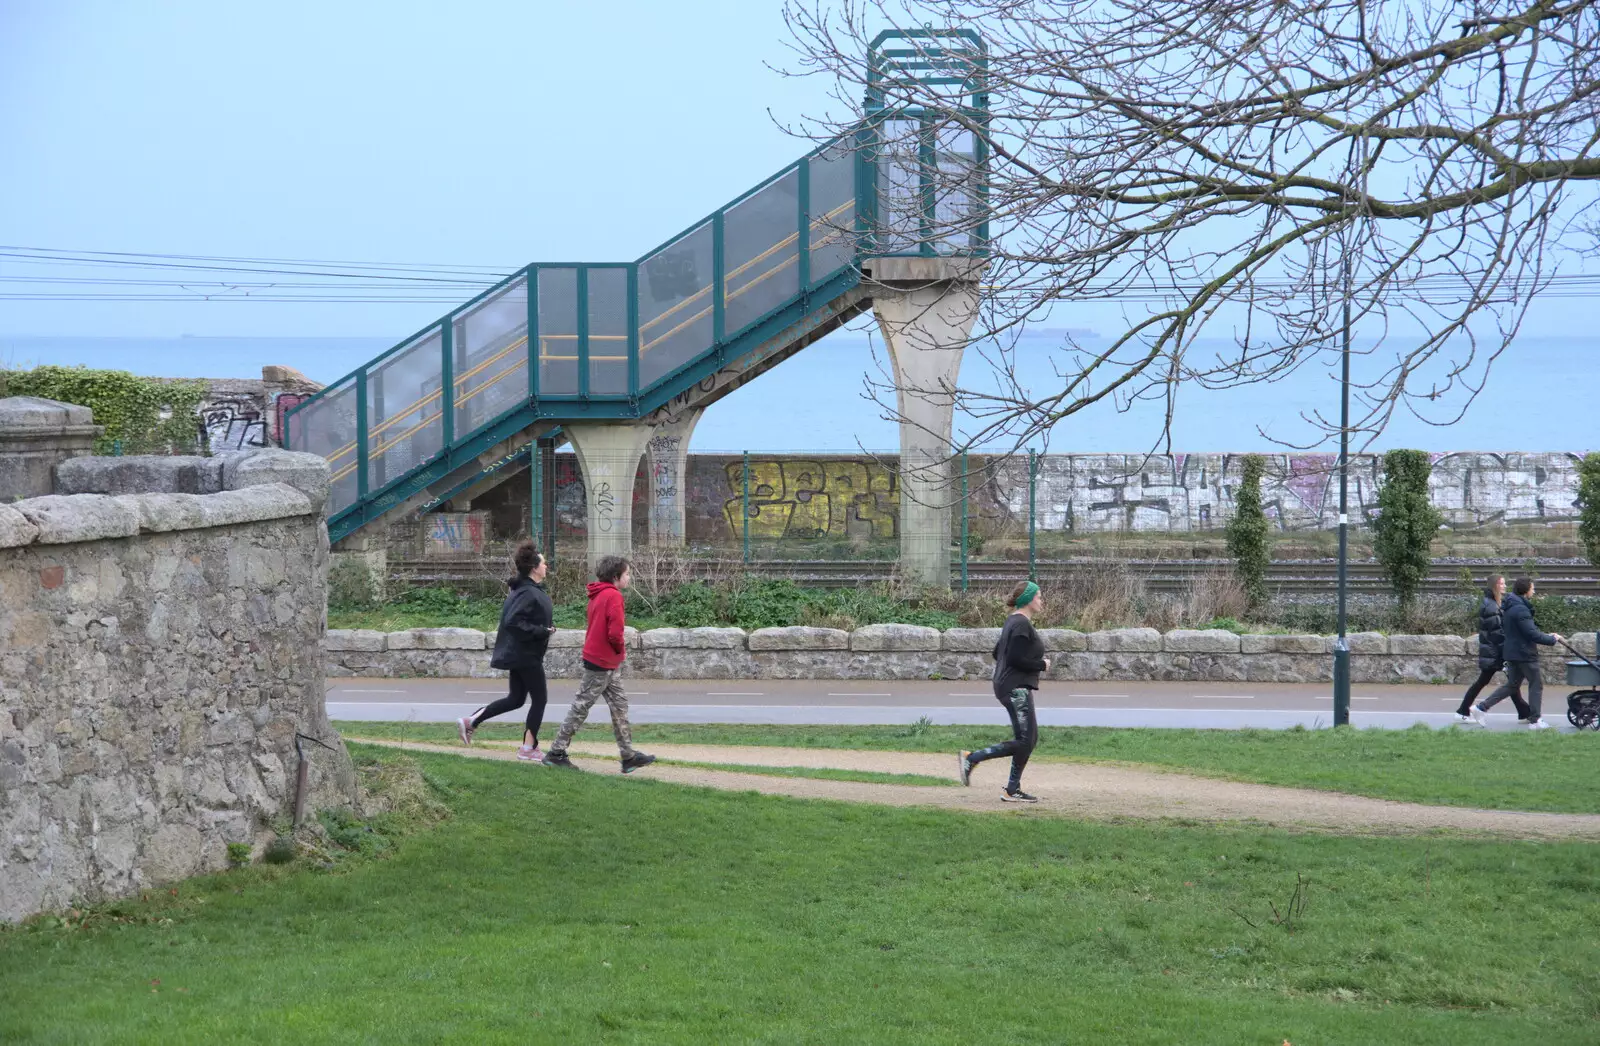 The runners head off through Blackrock Park, from The End of the Breffni, Blackrock, Dublin - 18th February 2023